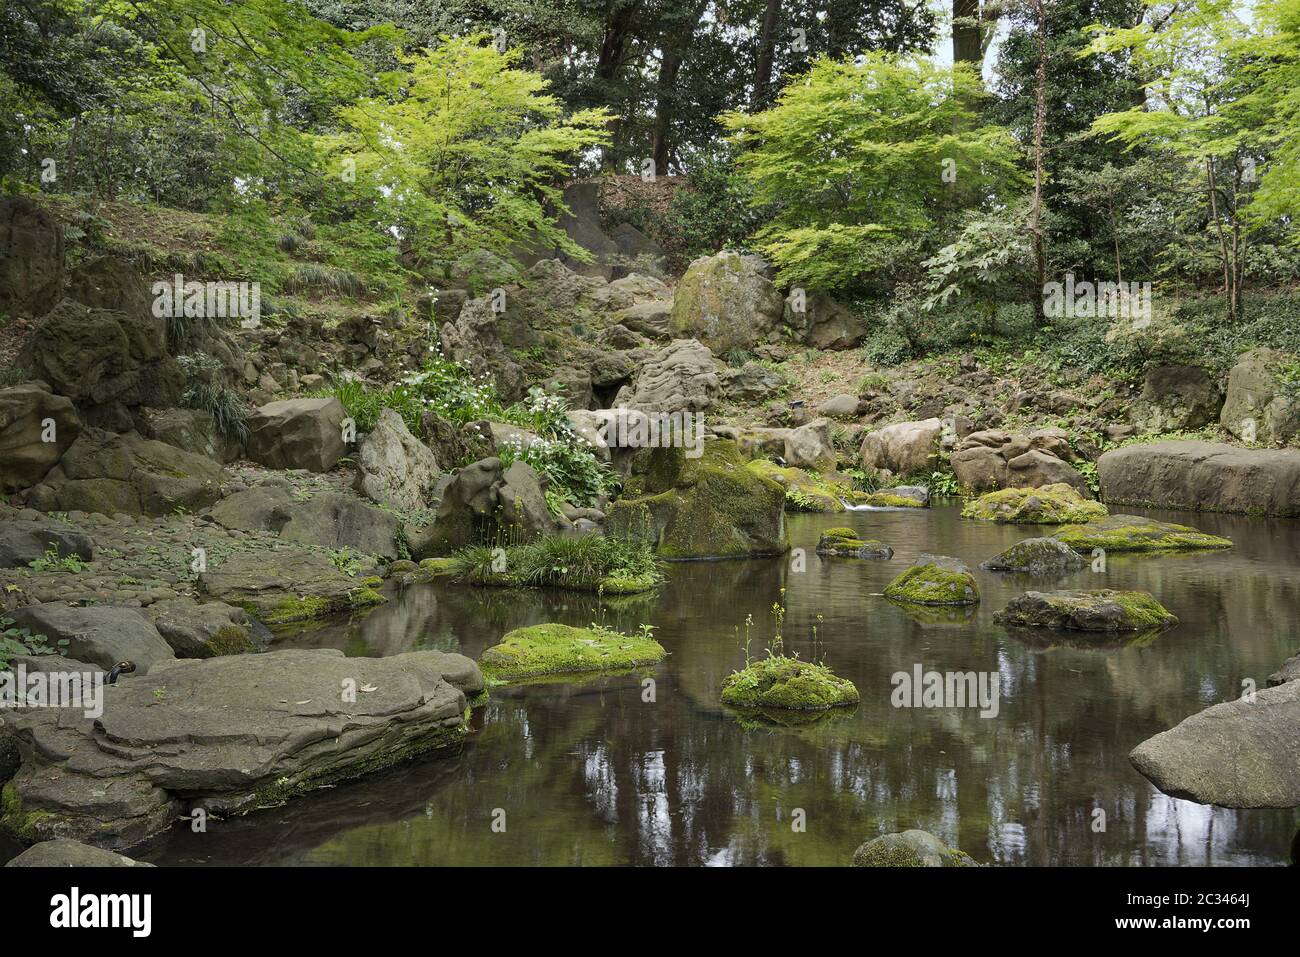 Flowers on stone covered with moss in the pond of tea house in rikugien garden park in Bunkyo distri Stock Photo